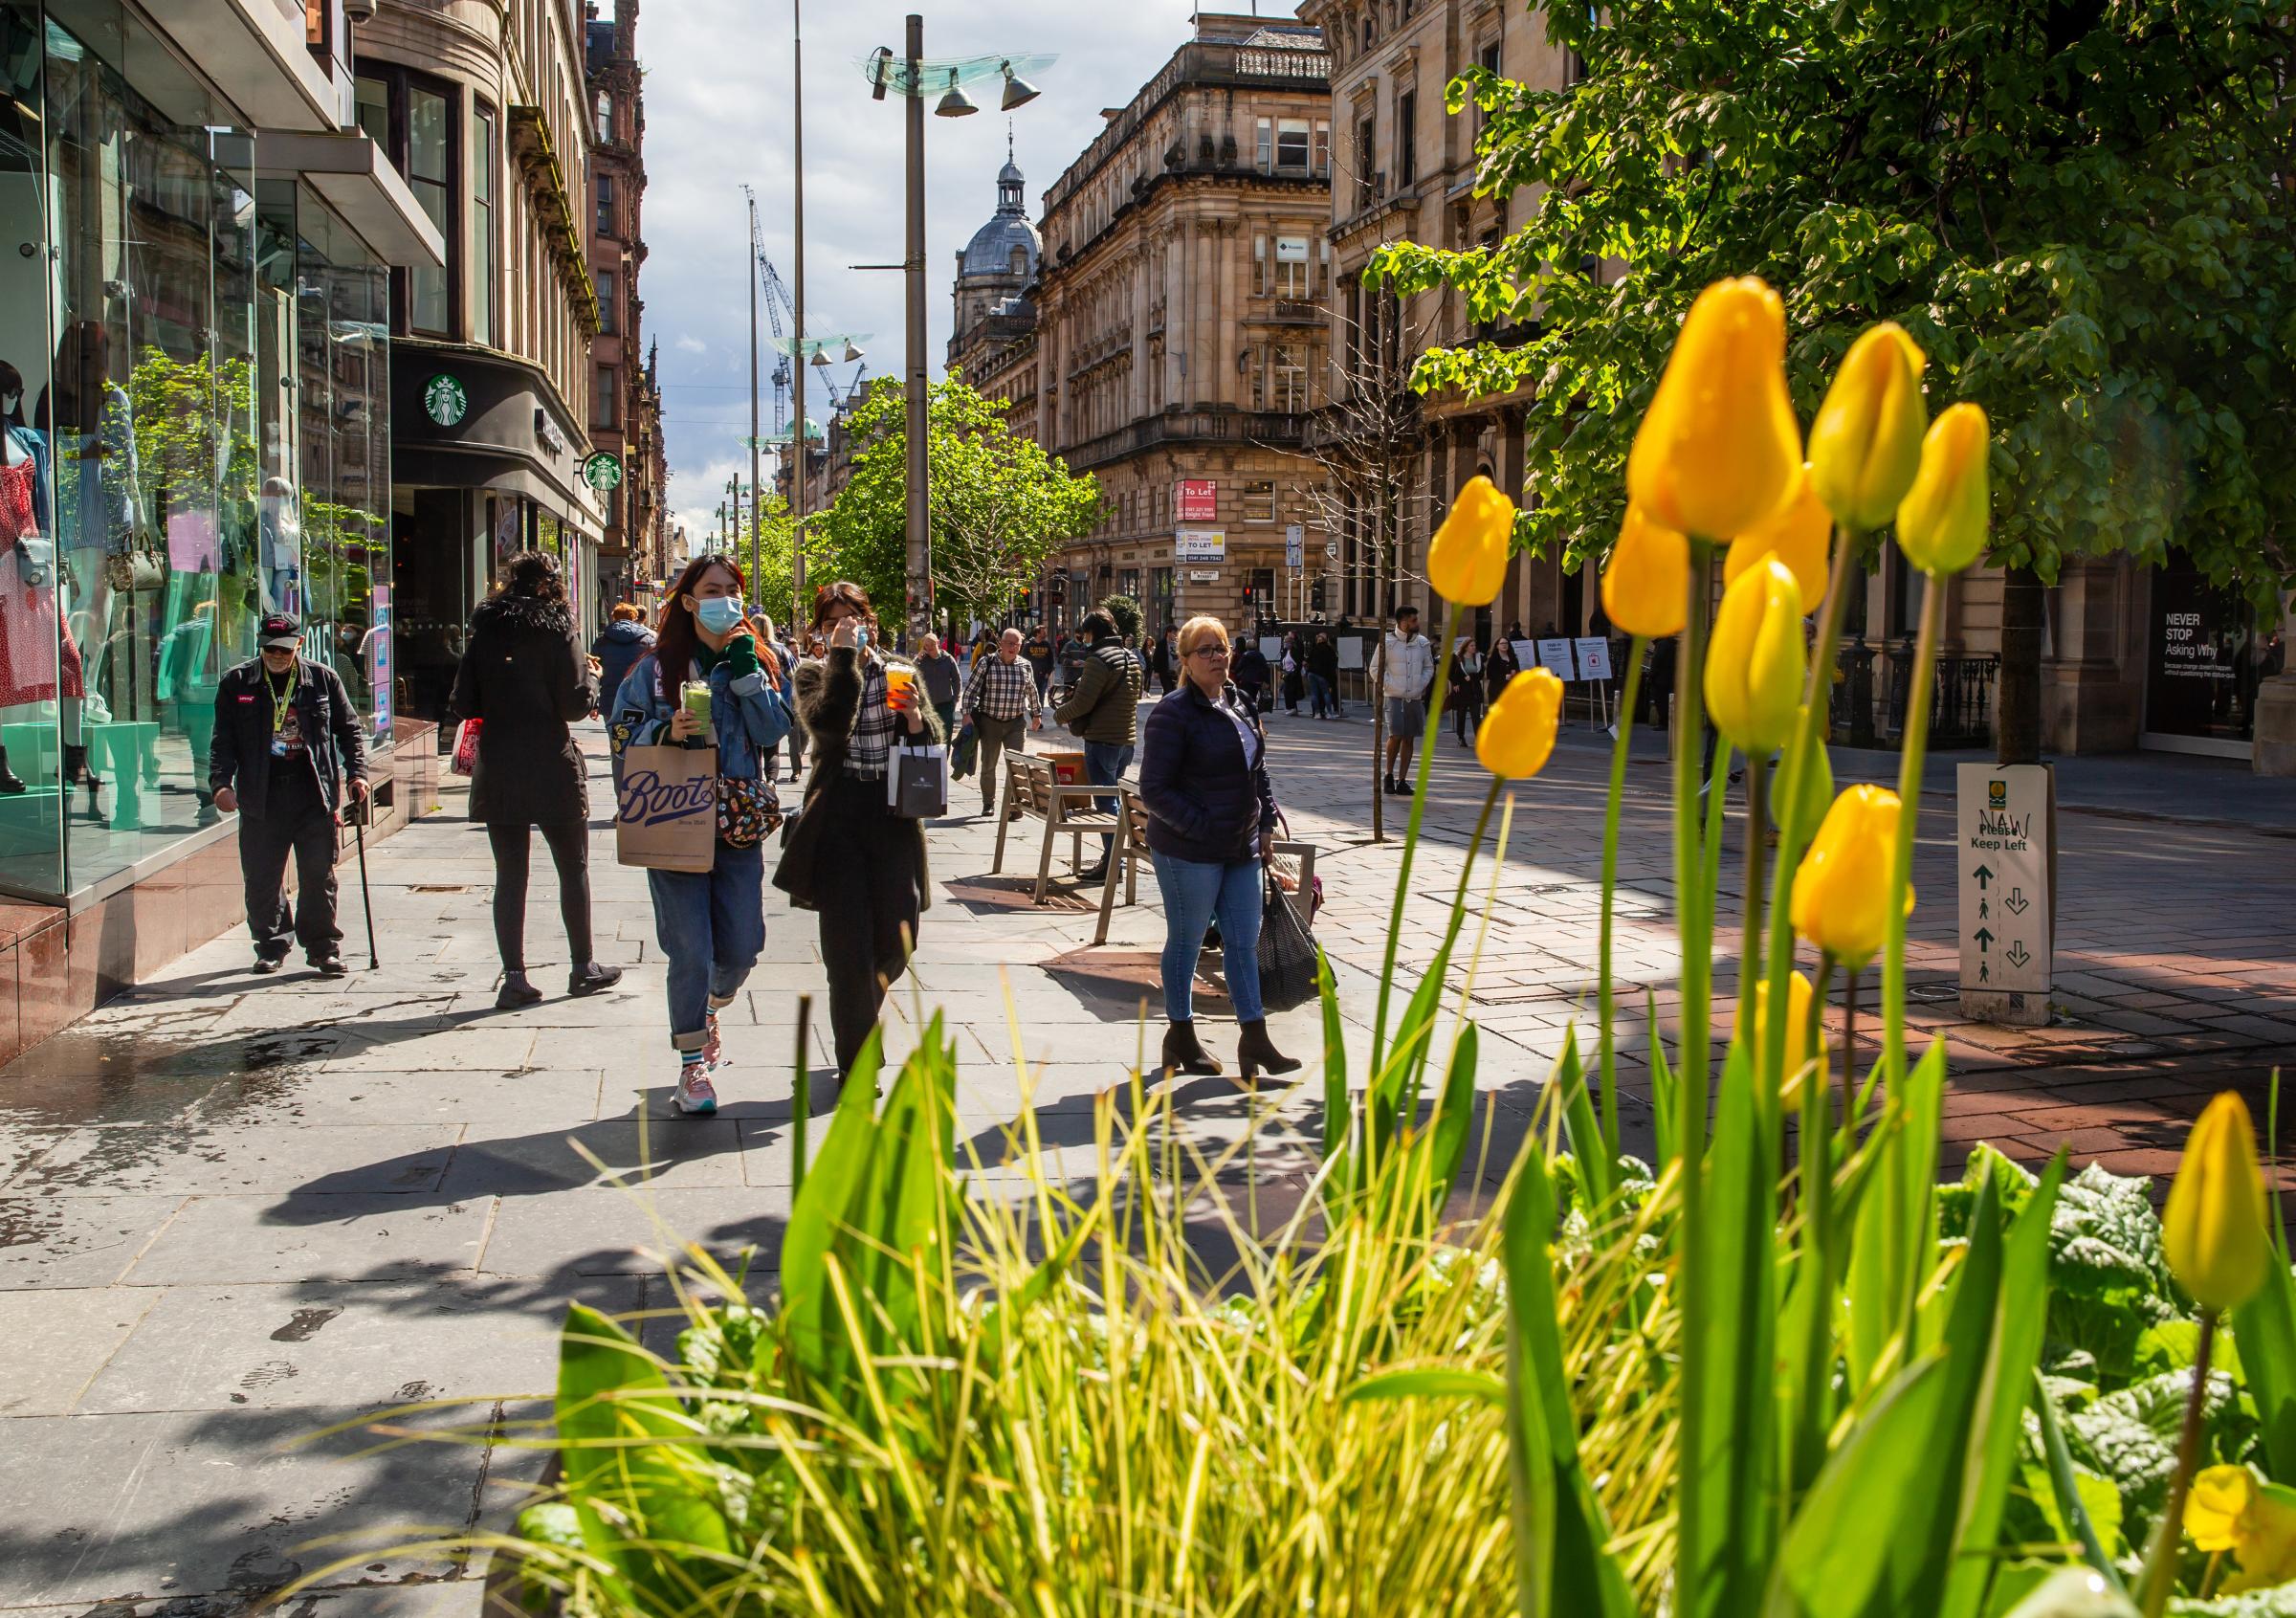 Glasgow wants to attract visitors from its key markets